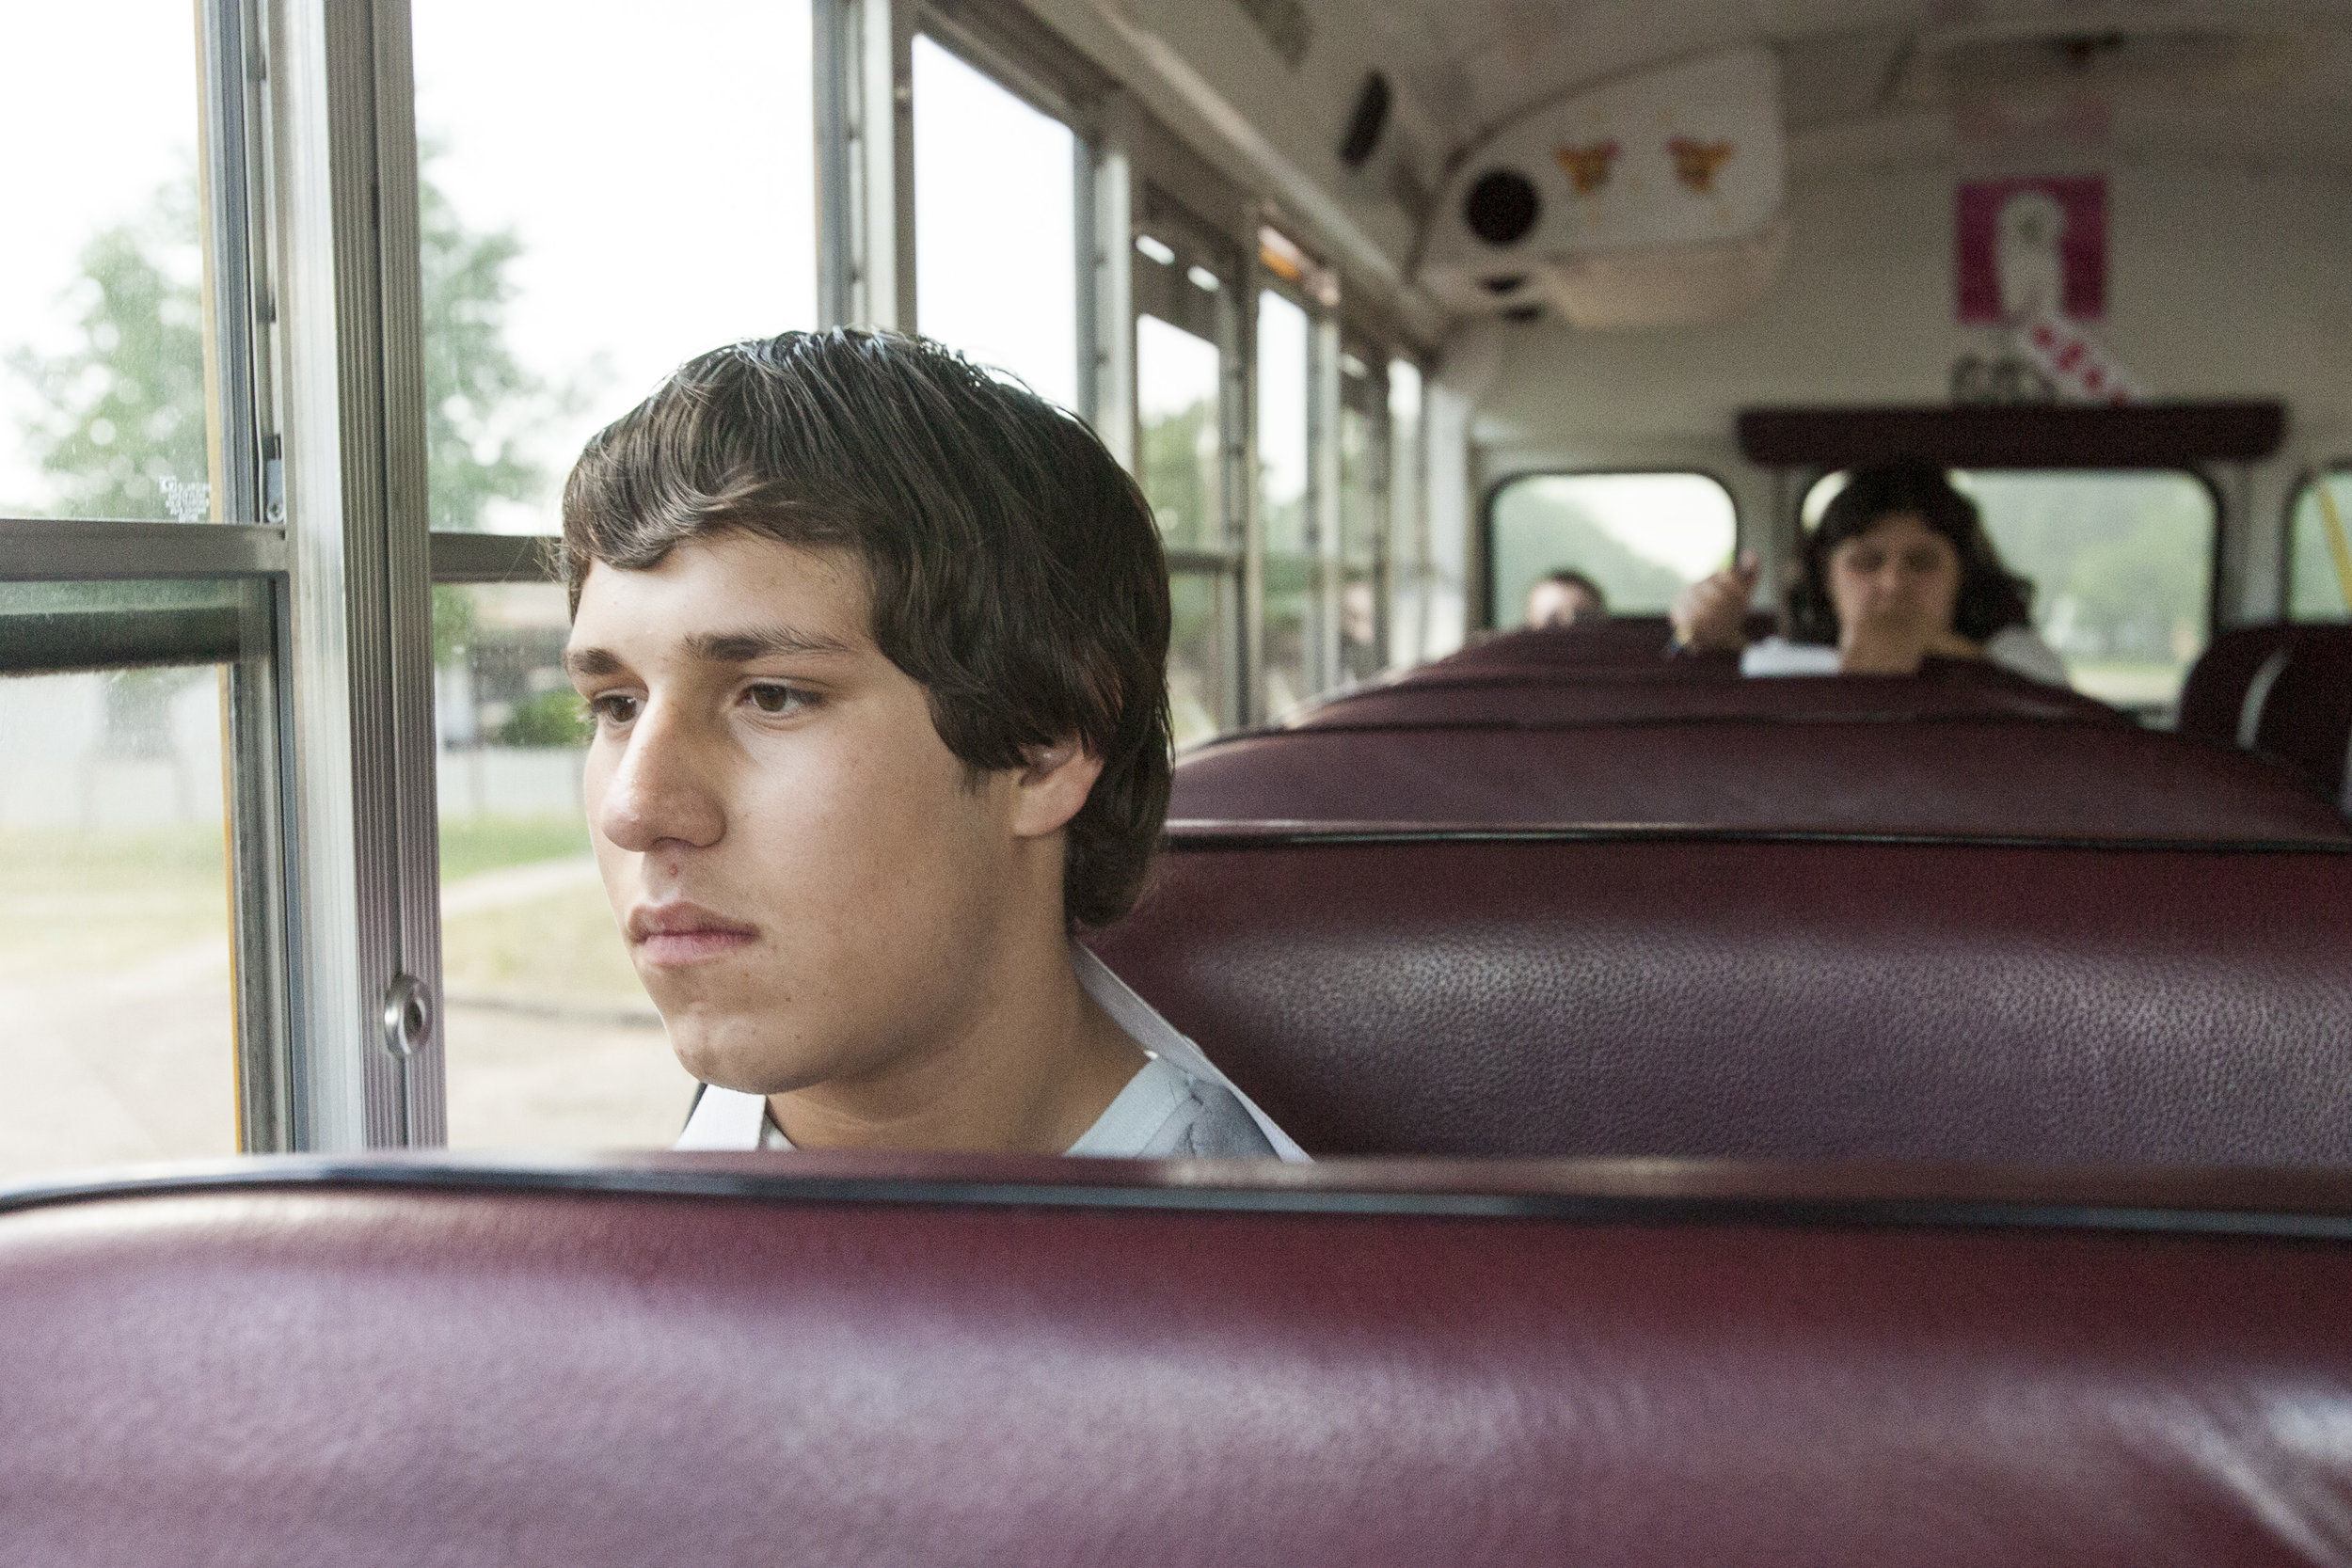  Jesse Flores rides the bus home on the last day of the school year Friday, May 28, 2010, in Odessa, Texas. 